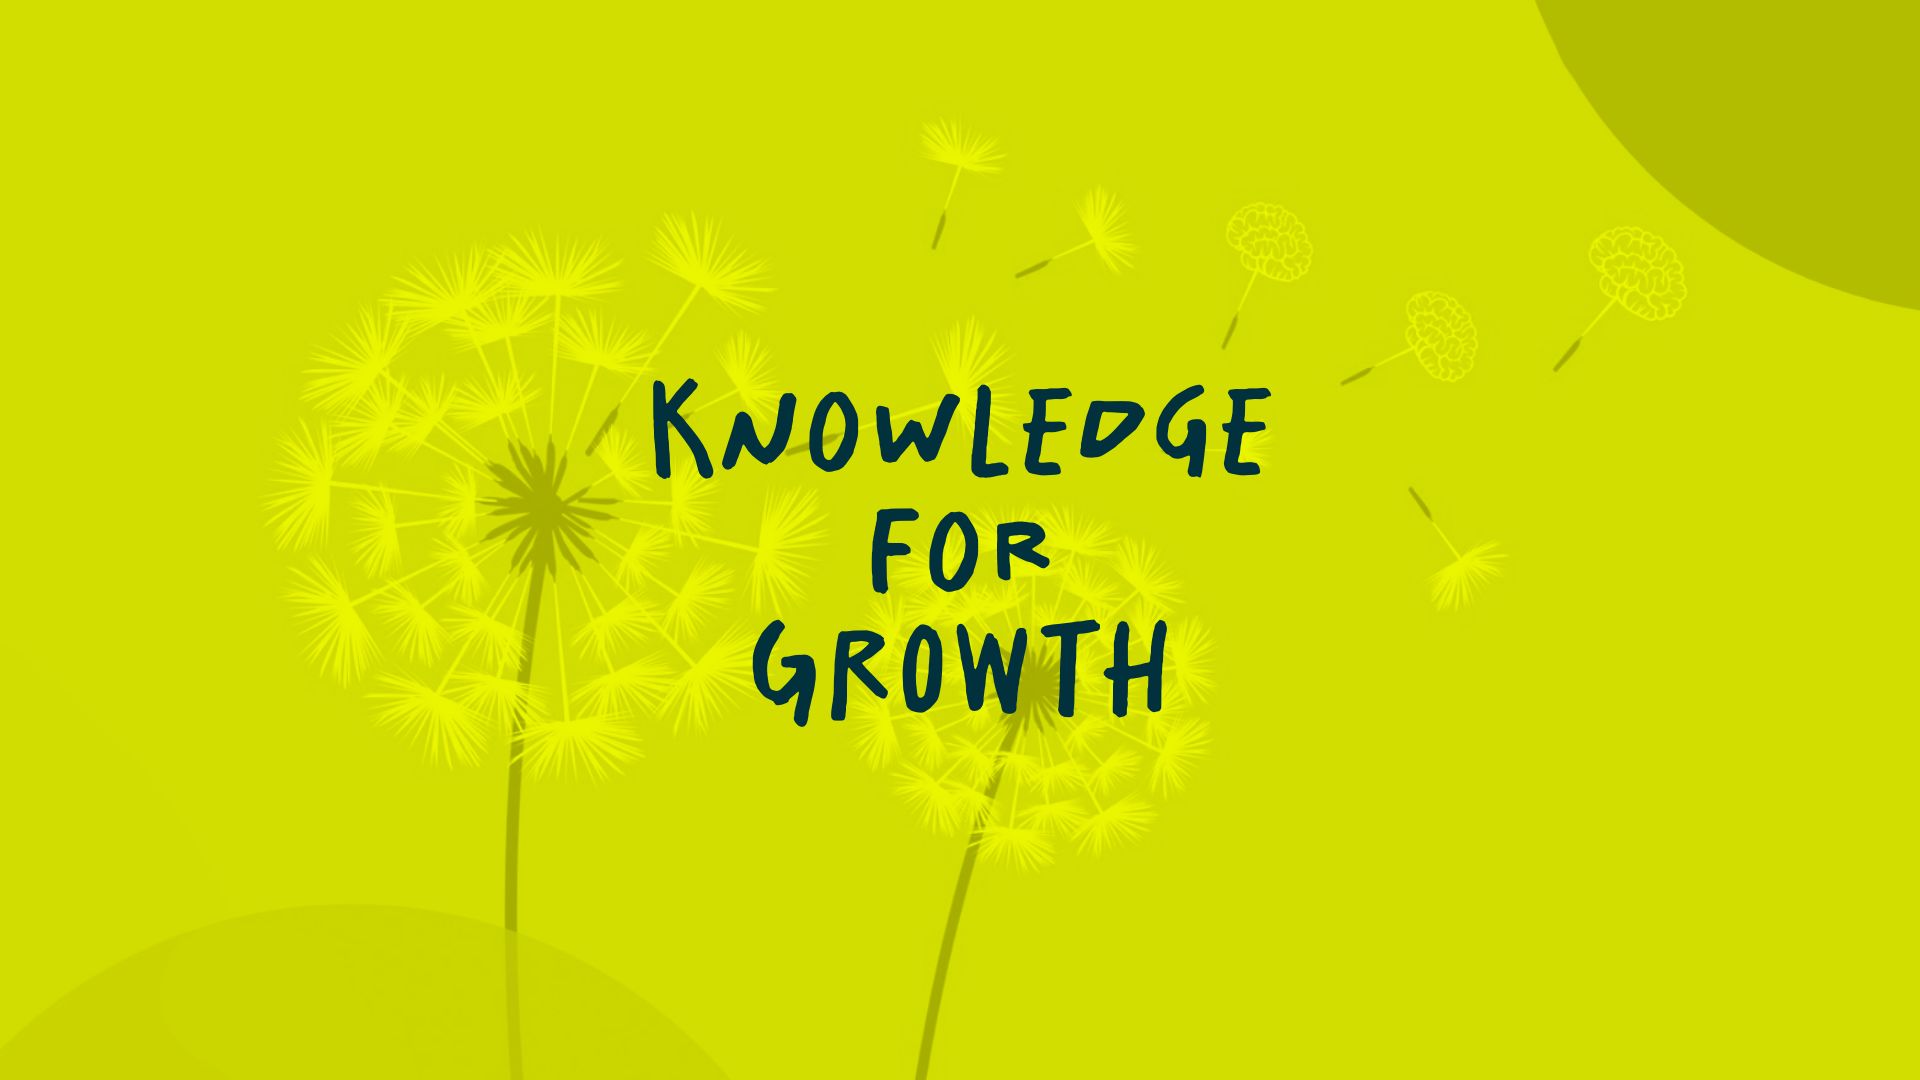 Blogpost - Knowledge for Growth - Life sciences